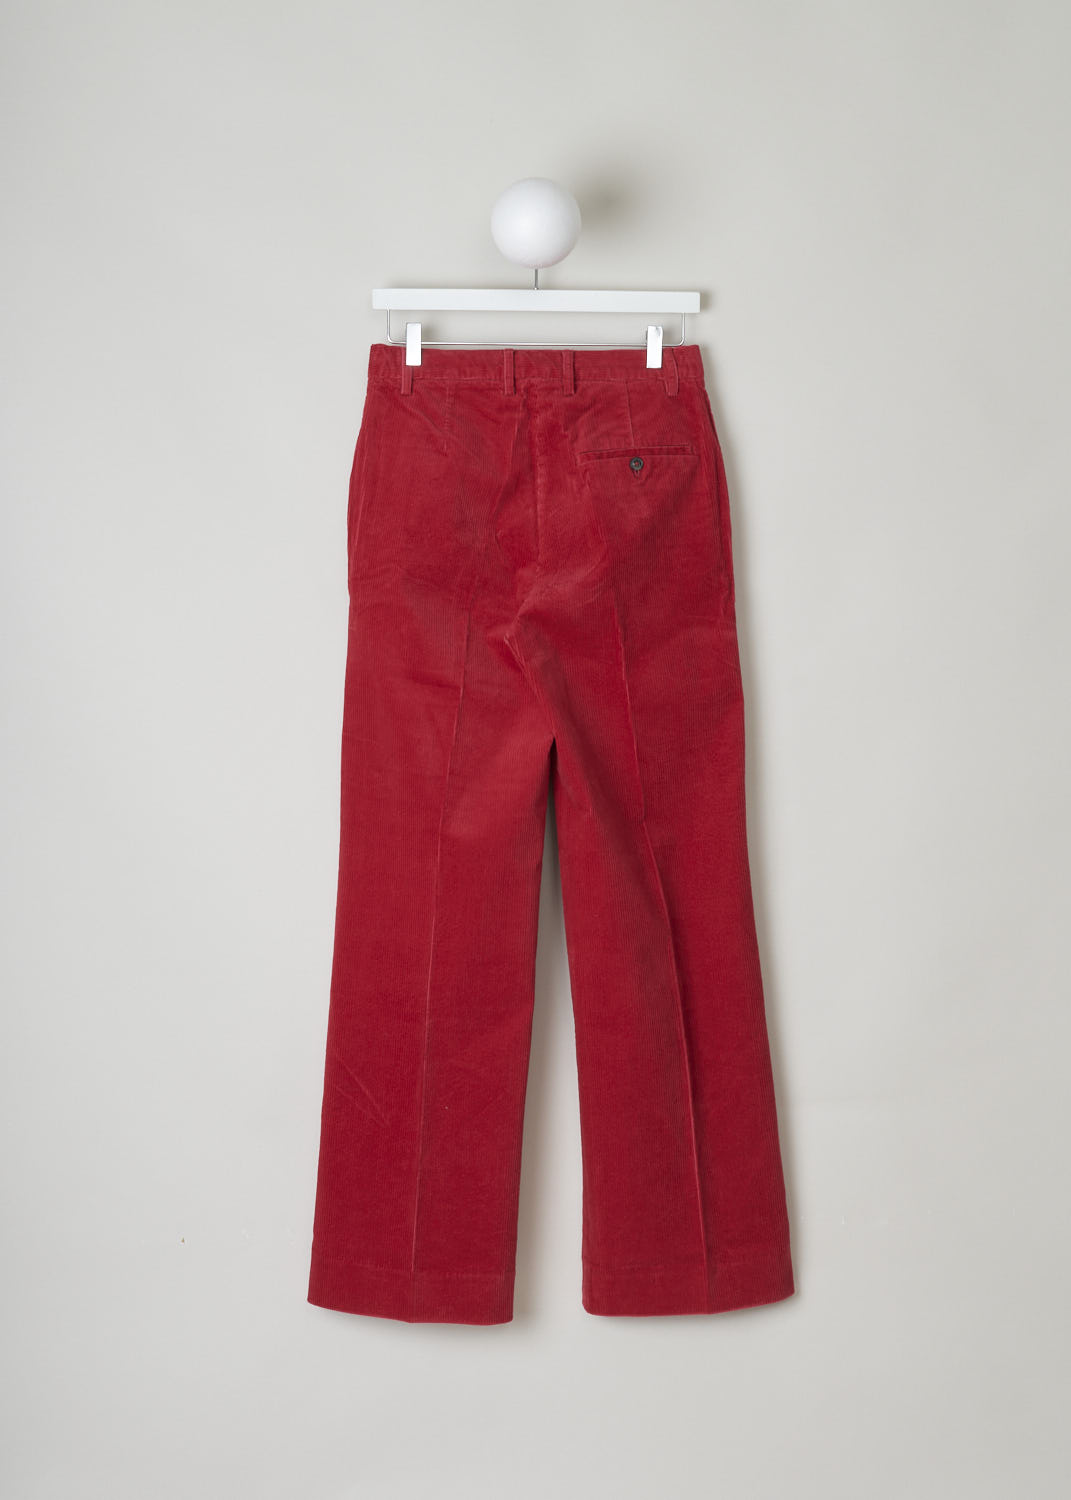 CLOSED, RED RIBBED TROUSERS, C91265_38W_20895, Red, Back, Bright red corduroy trousers with belt loops and concealed zip and double clasp closure. These trousers have slanted pockets in the front and a single welt pocket with button in the back. This model has straight pant legs. 
